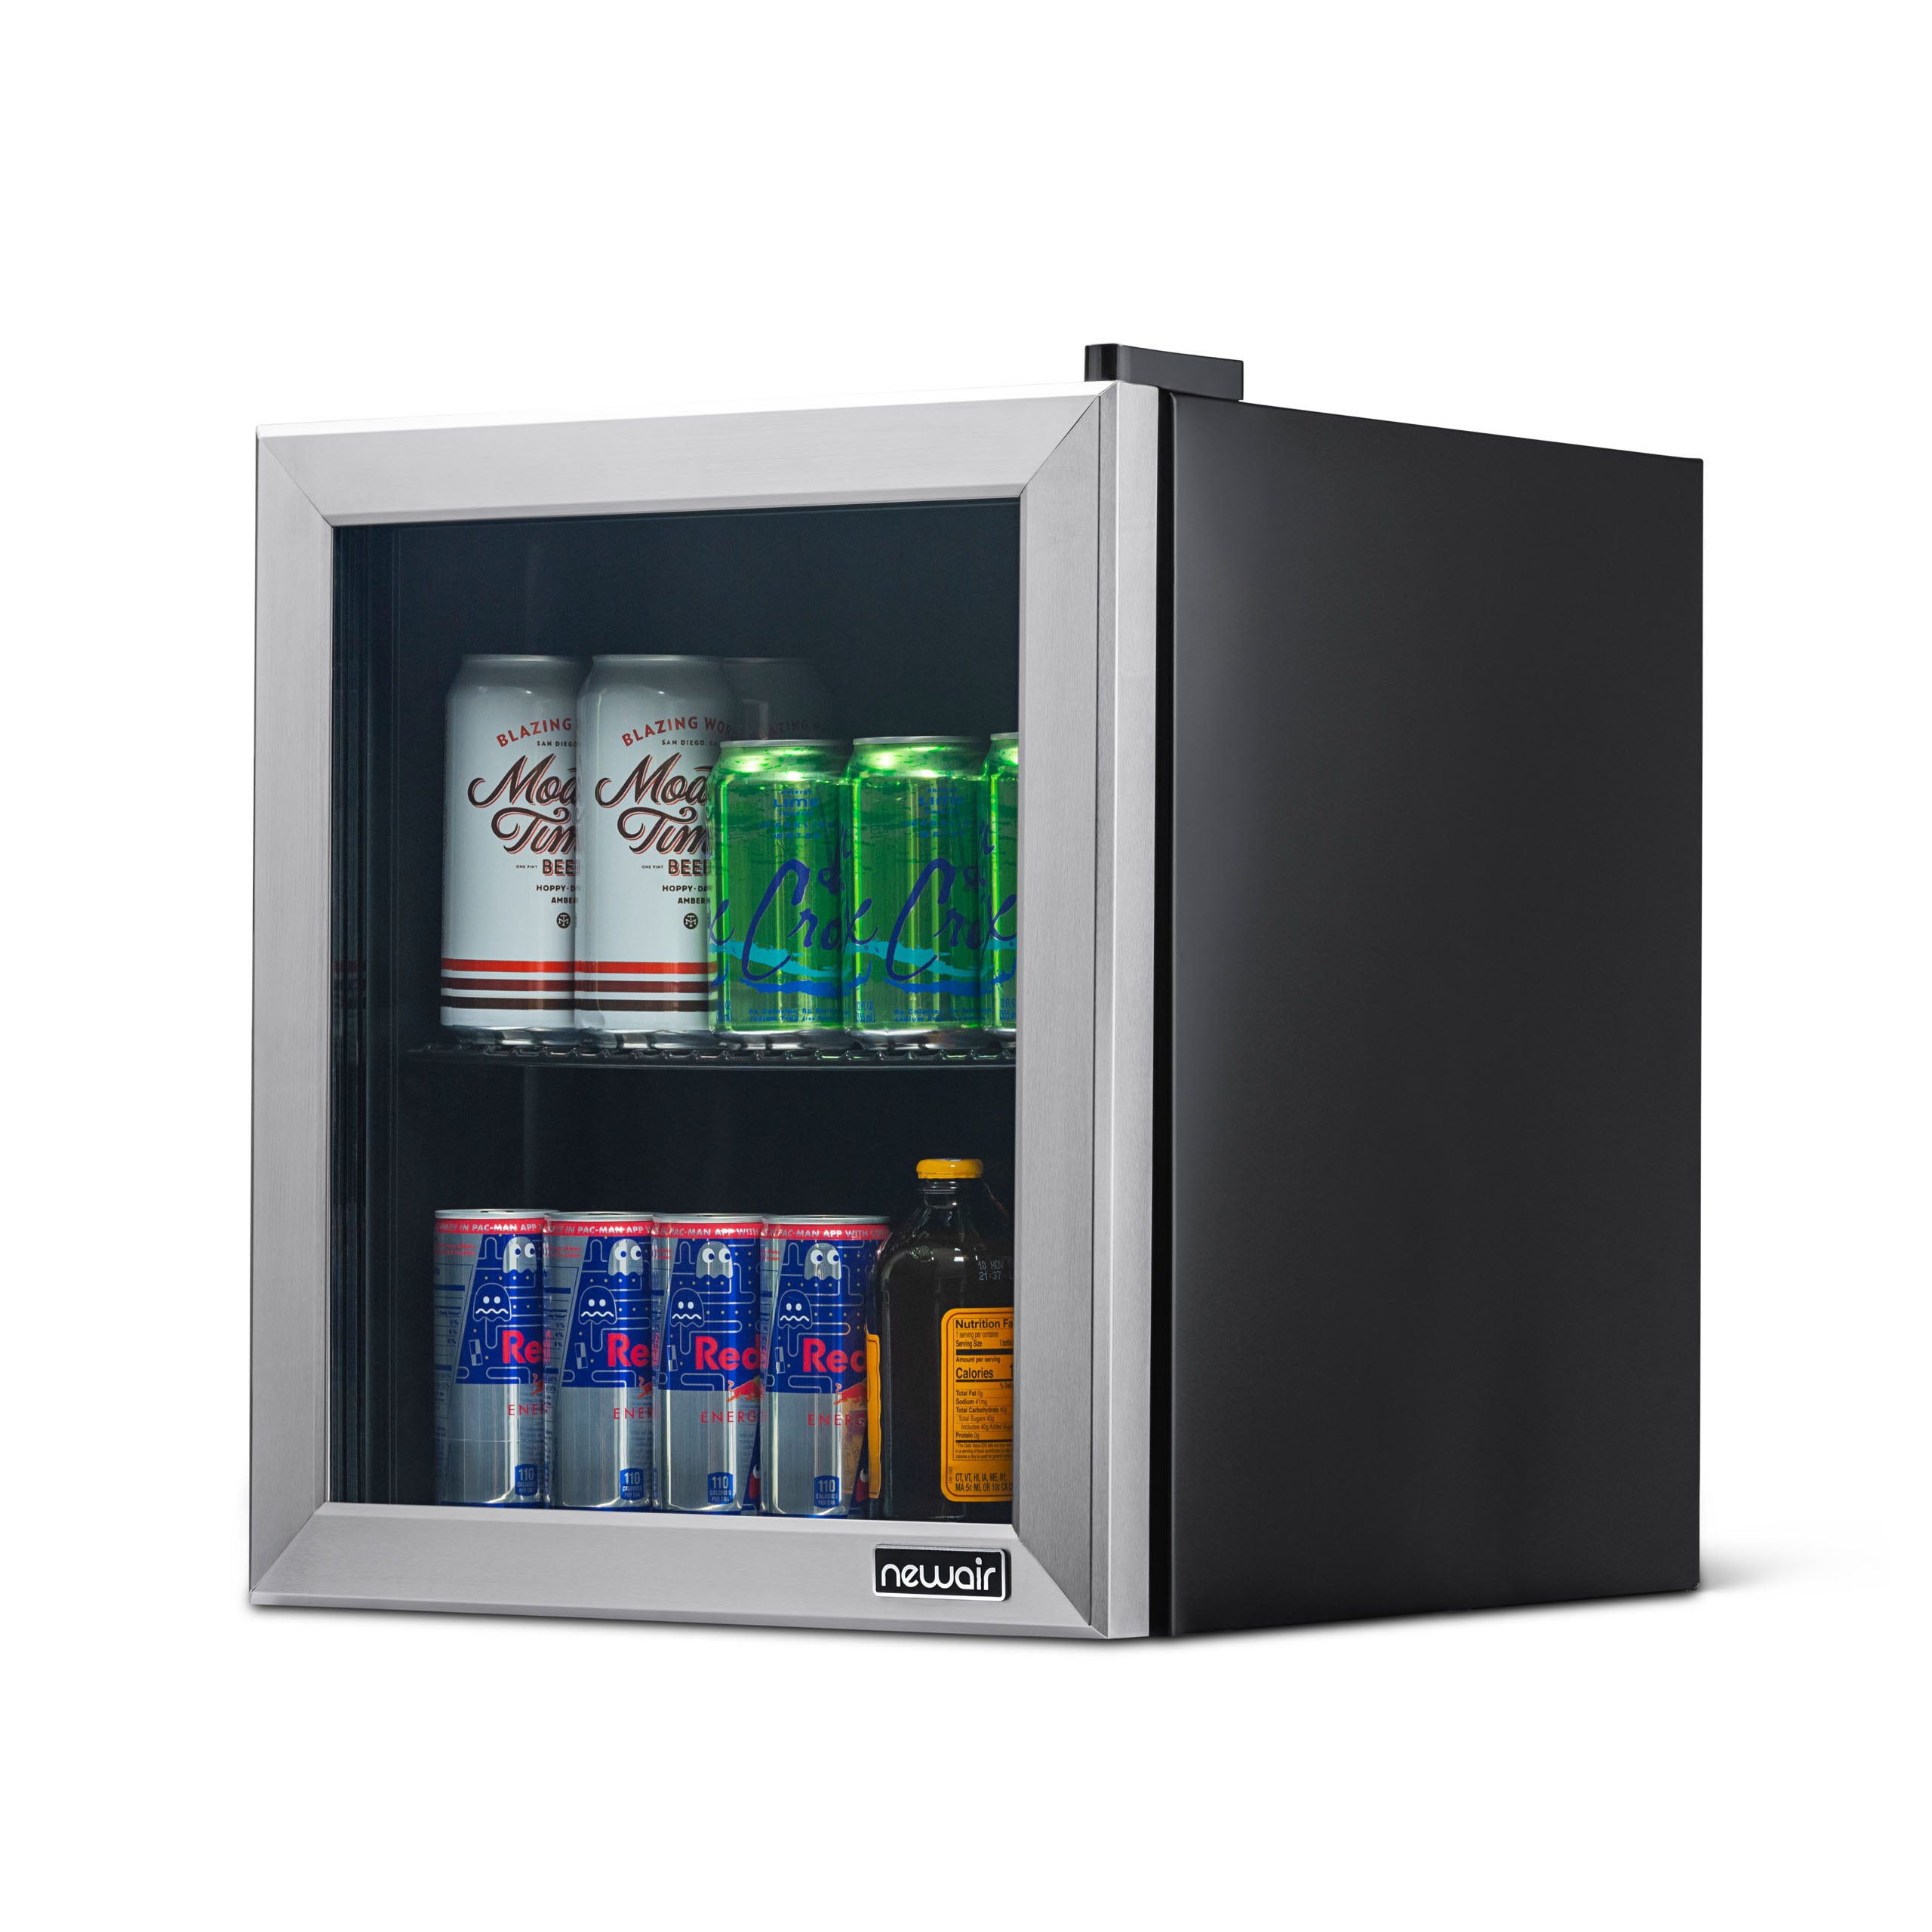 Newair 60 Can Beverage Cooler  Compact Mini Fridge chills down to 34°